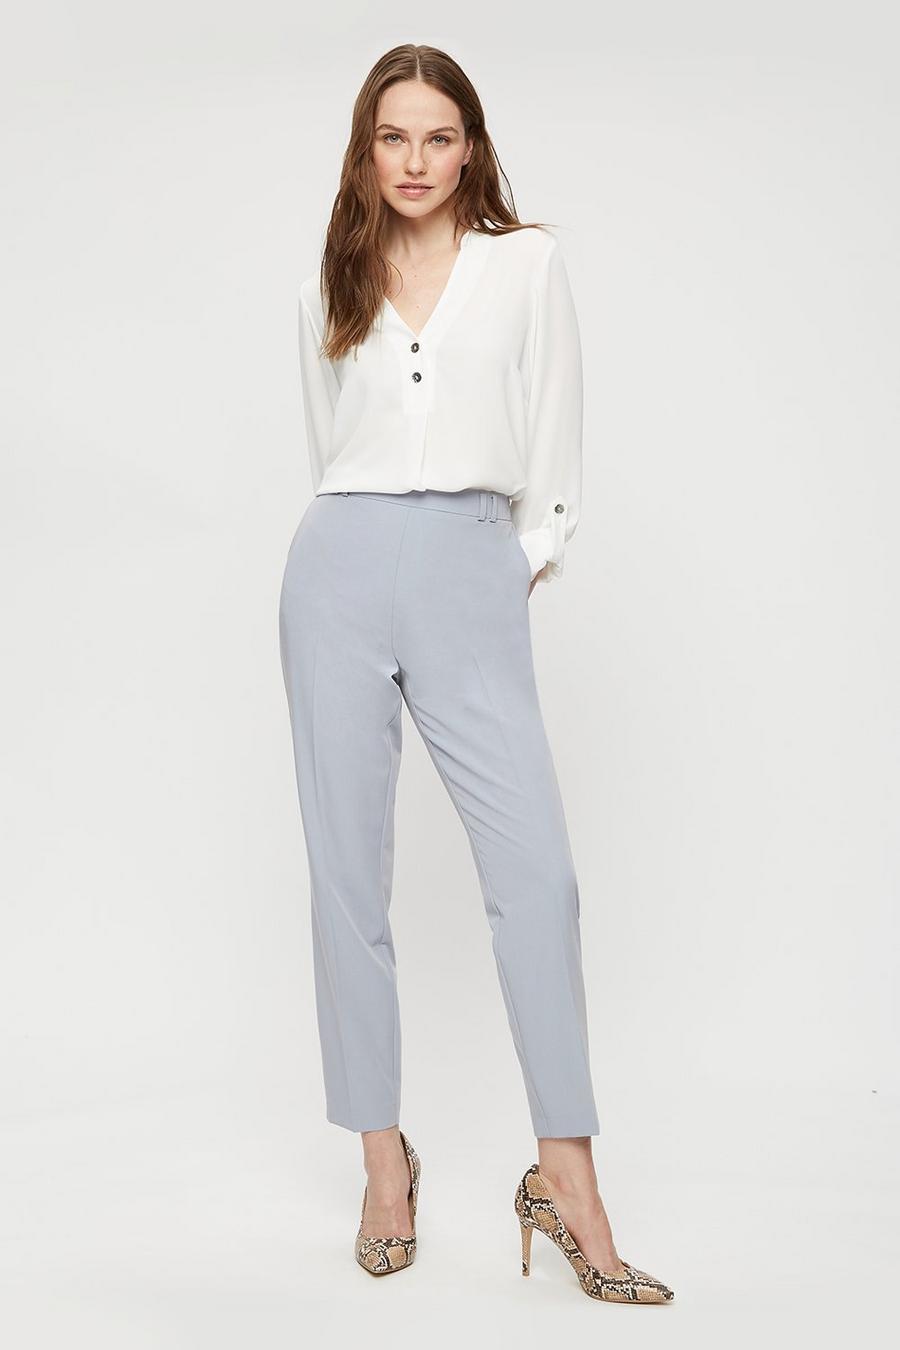 Silver Grey High Waisted Tailored Trouser